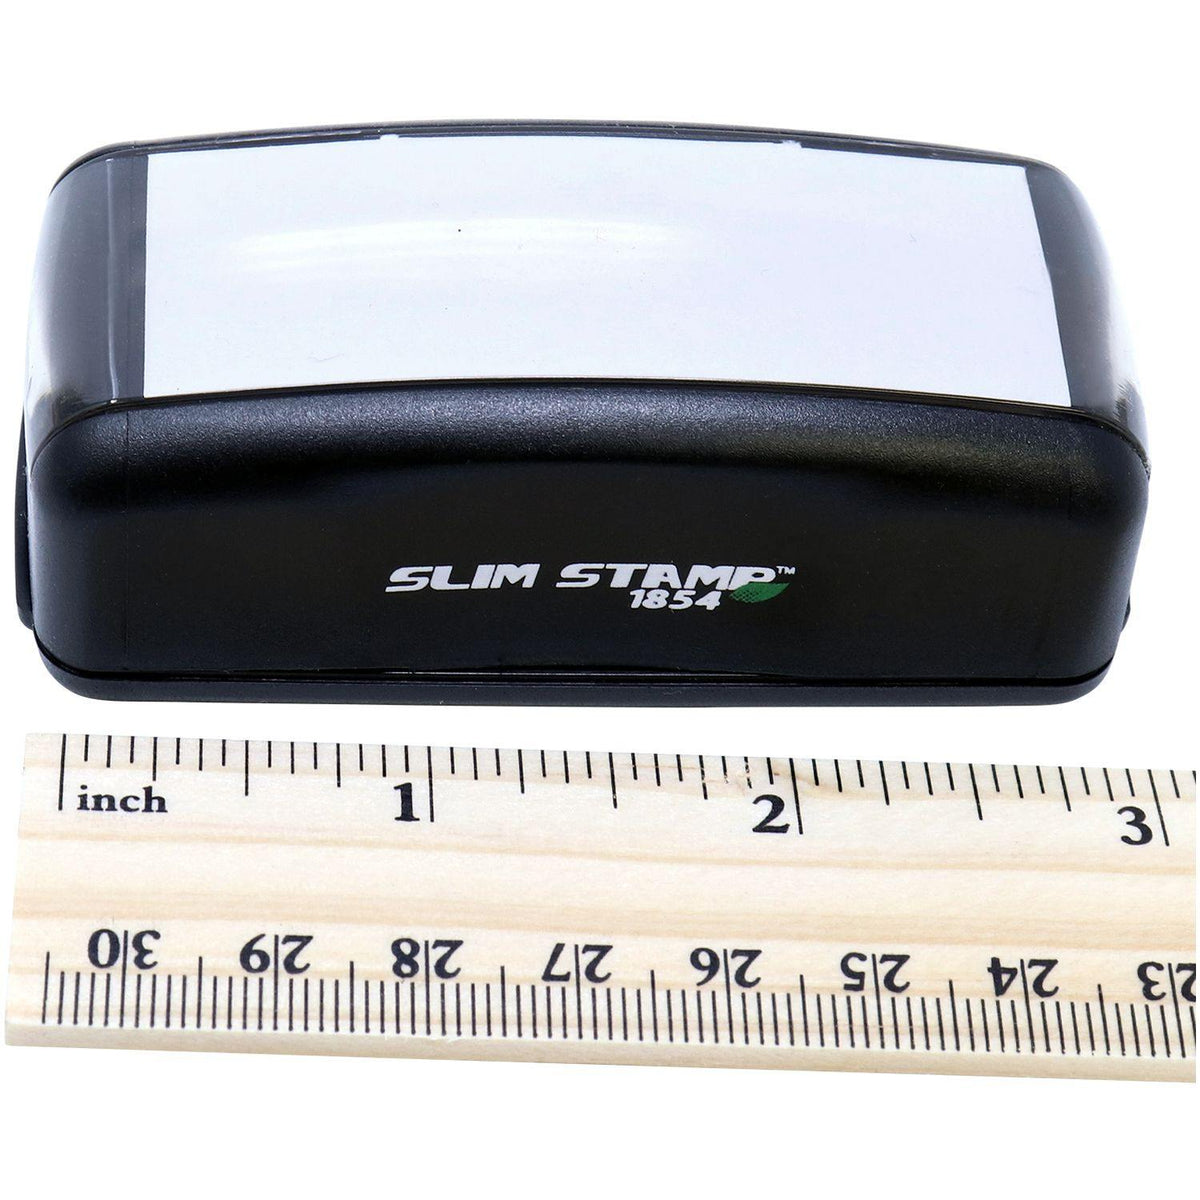 Measurement Large Pre-Inked Shadow Copy Stamp with Ruler